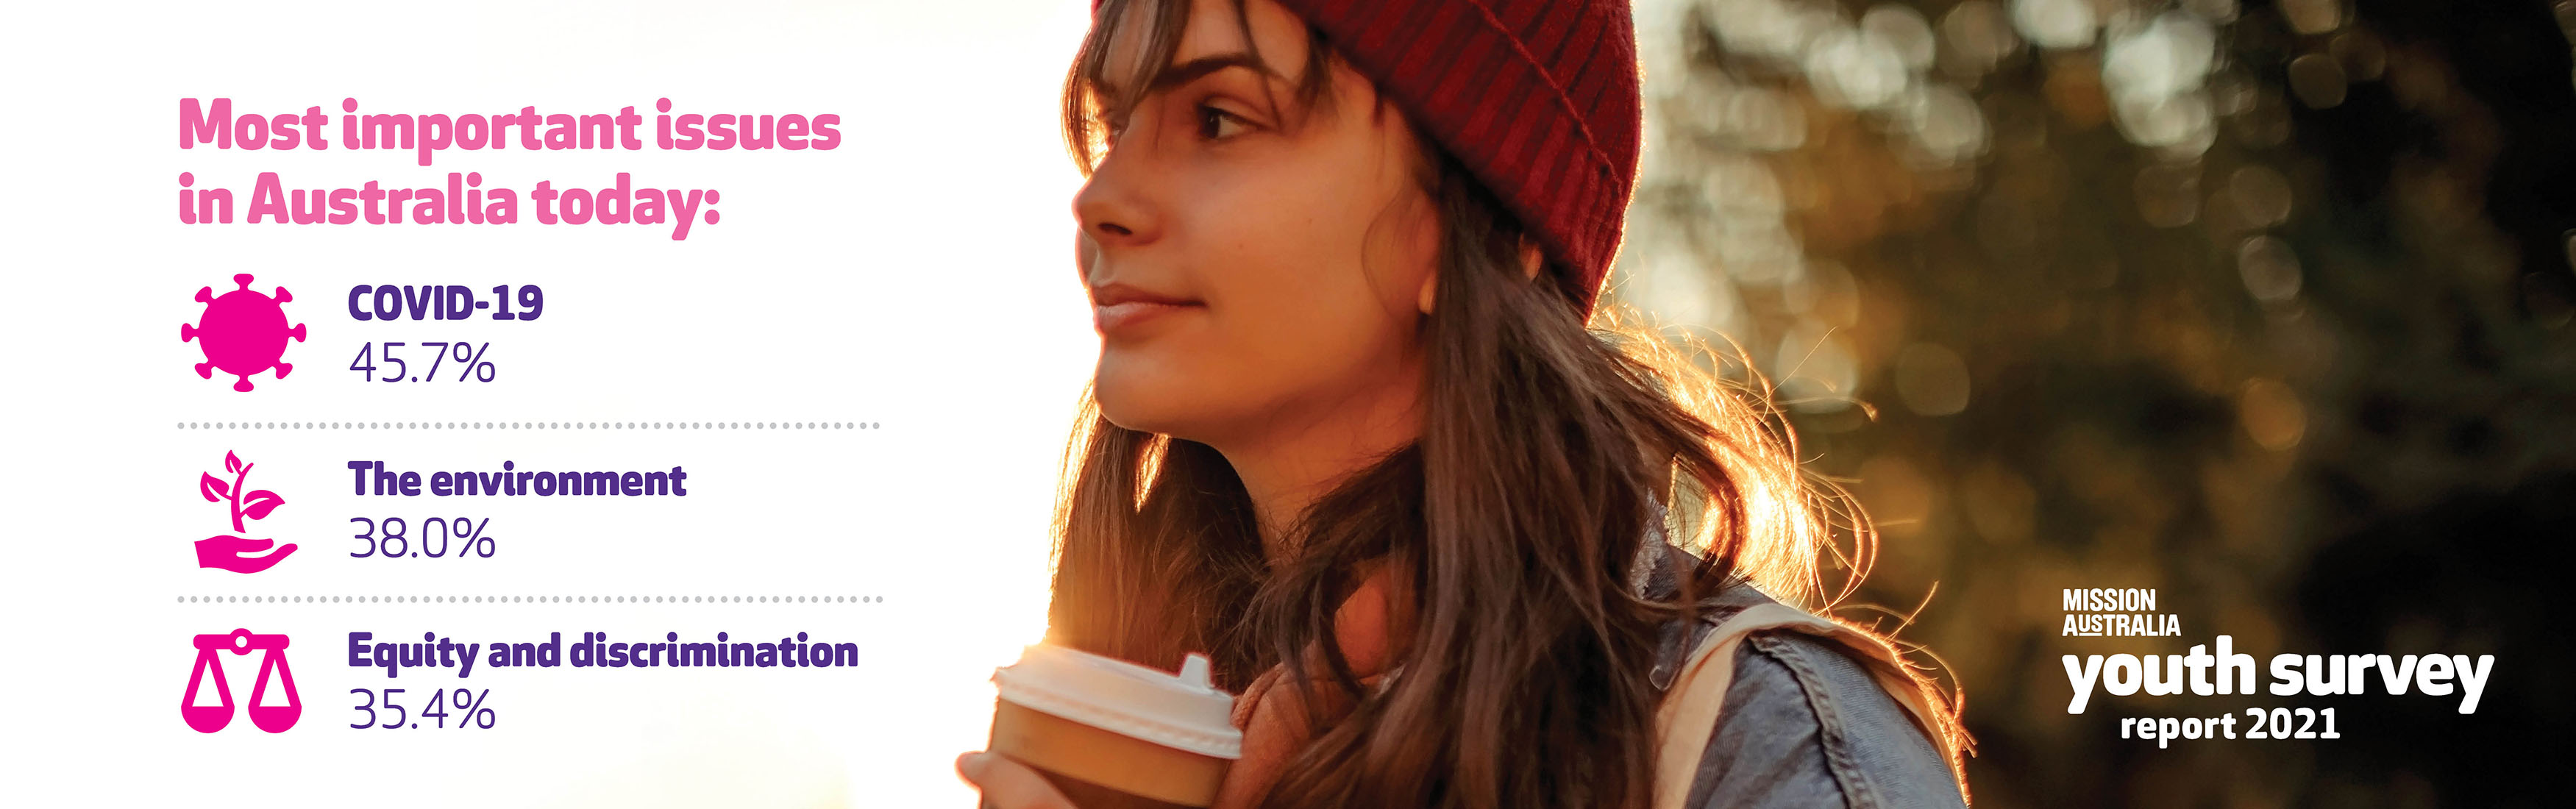  Image of a young woman holding a coffee cup. Text on top of image reads, “Most important issues in Australia today according to young people: Covid-19 (45.7%), the environment (38%) and equity and discrimination (35.4%)”  